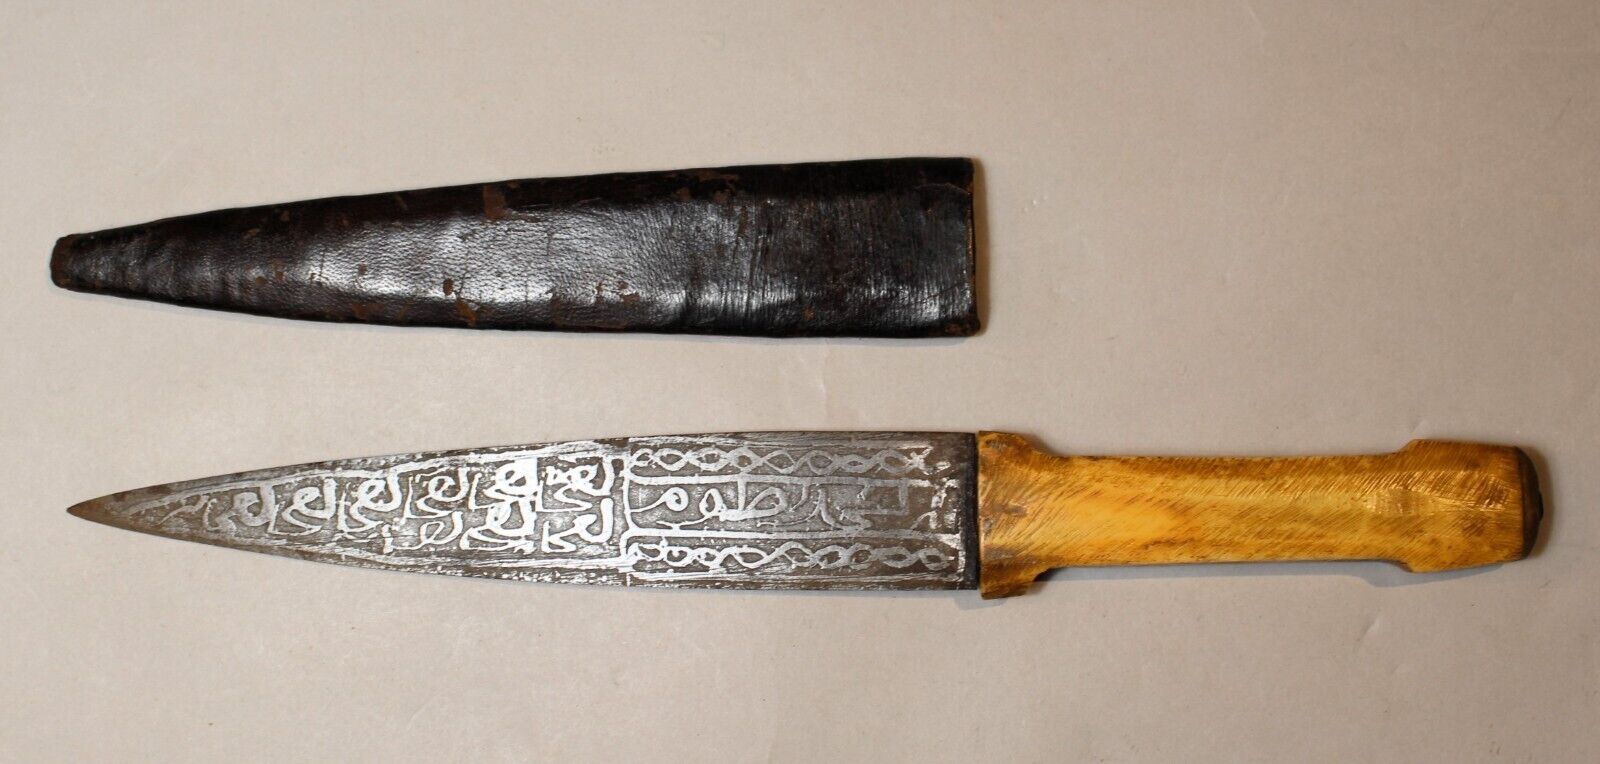 Antique Ottoman Tribal Knife with Islamic Verse Inscribed Blade & Sheath c. 1910